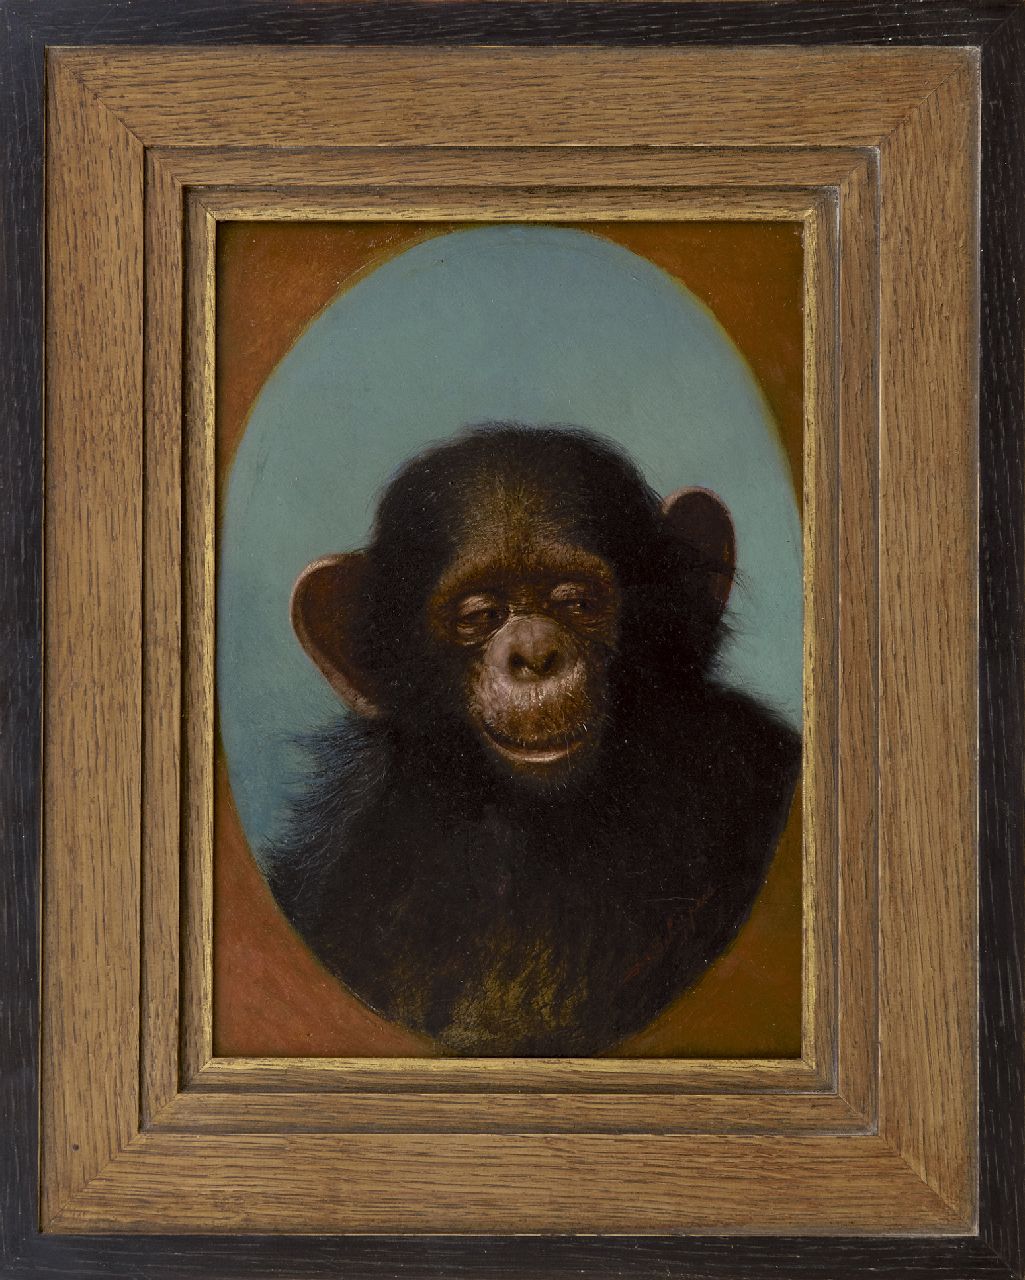 Schippers J.  | Joseph Schippers, Study of a chimpanzee, oil on panel 27.1 x 19.4 cm, signed l.r. and dated on the reverse 'Anvers' 3/2 1929